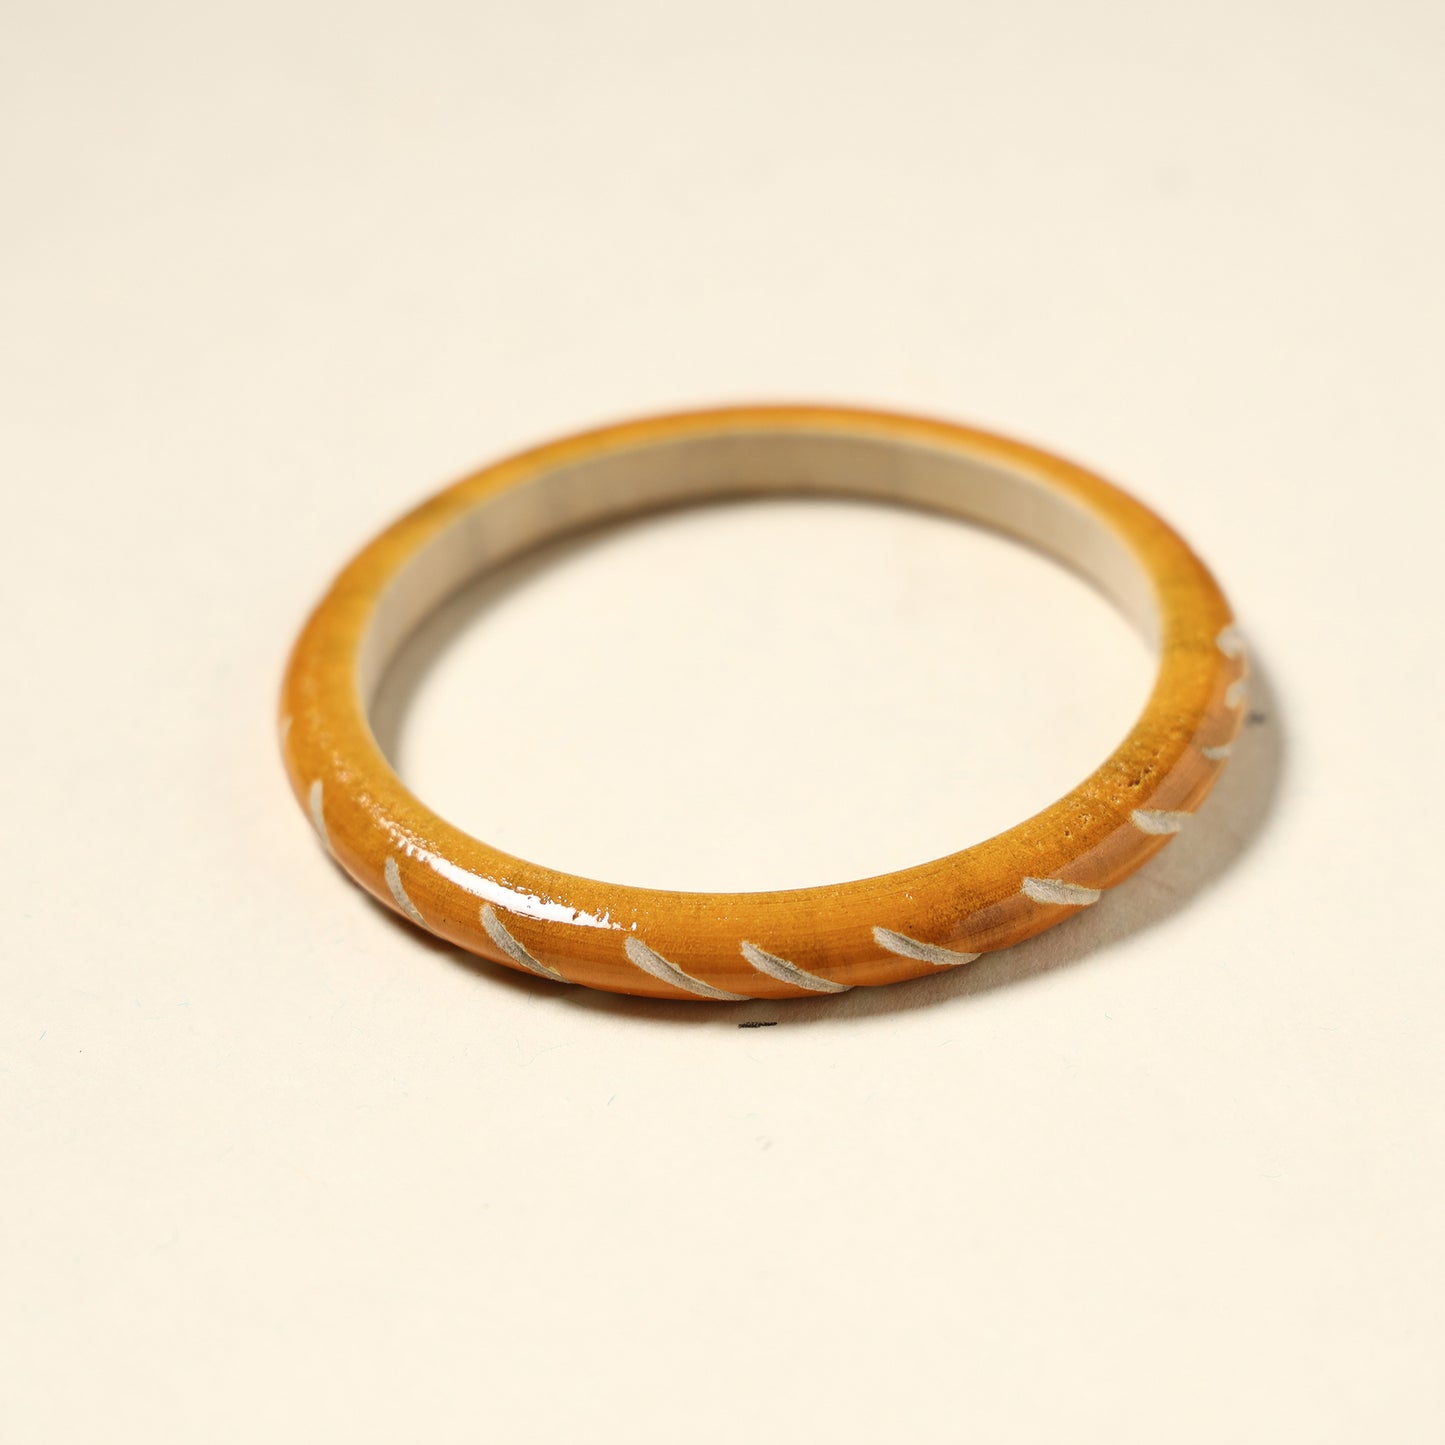 Channapatna Handcrafted Wooden Bangle (Size - 2-6) 29